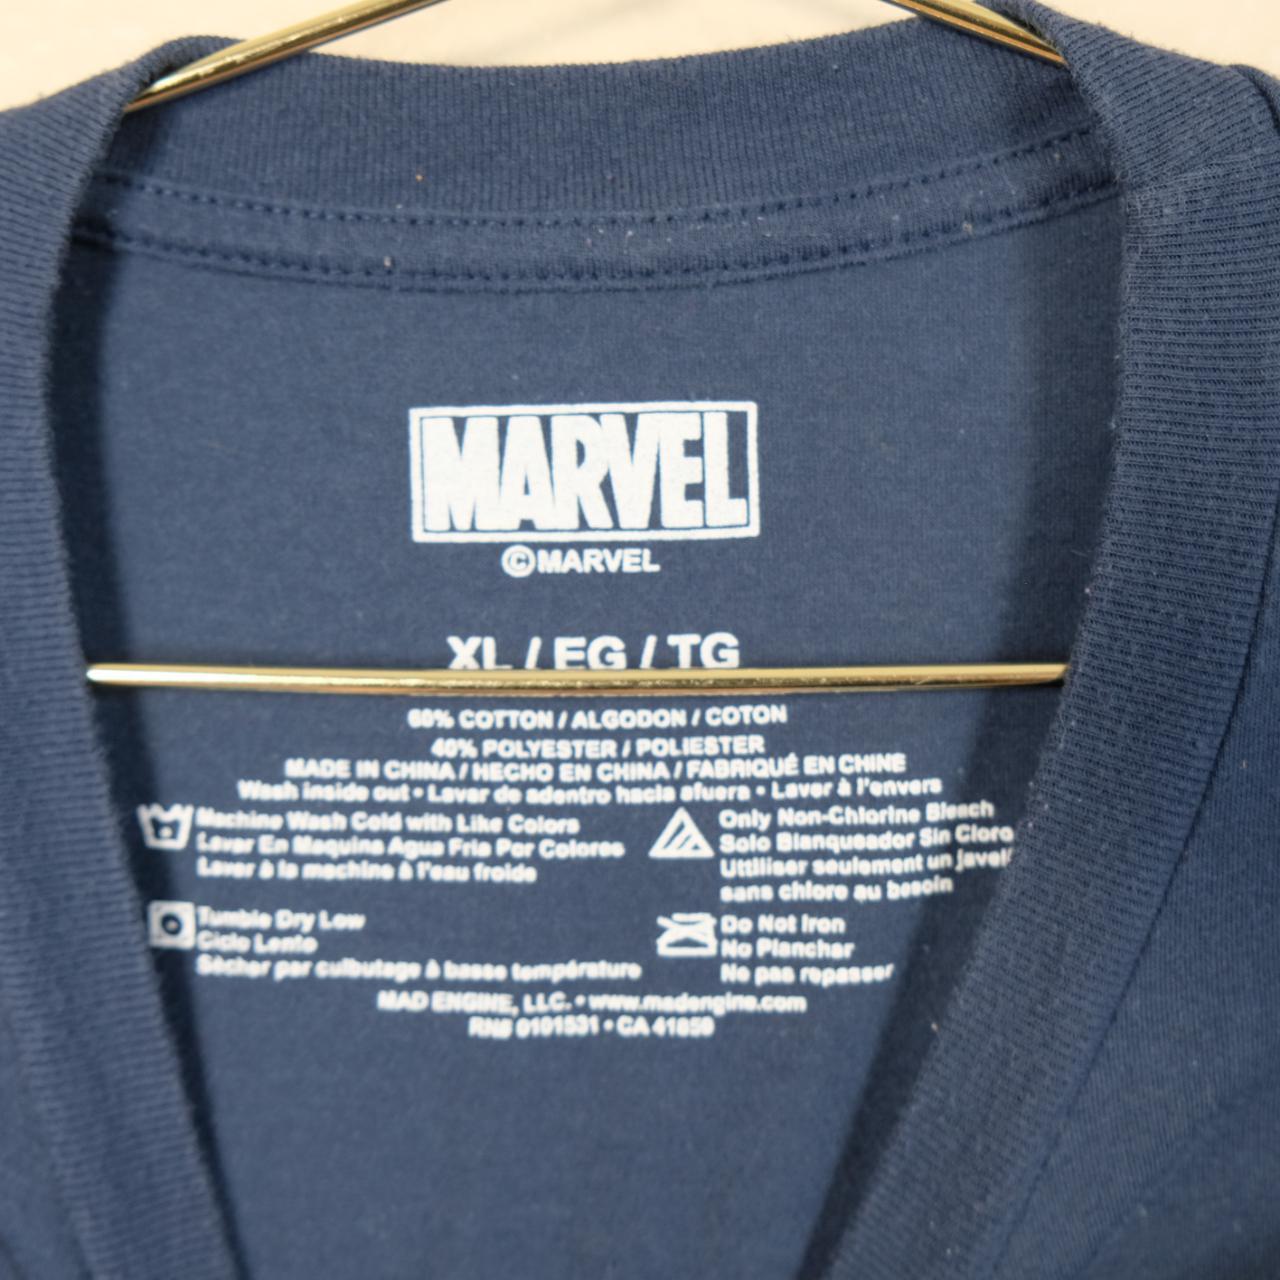 Product Image 2 - Pre-Loved Marvel Captain America Tee

Tag